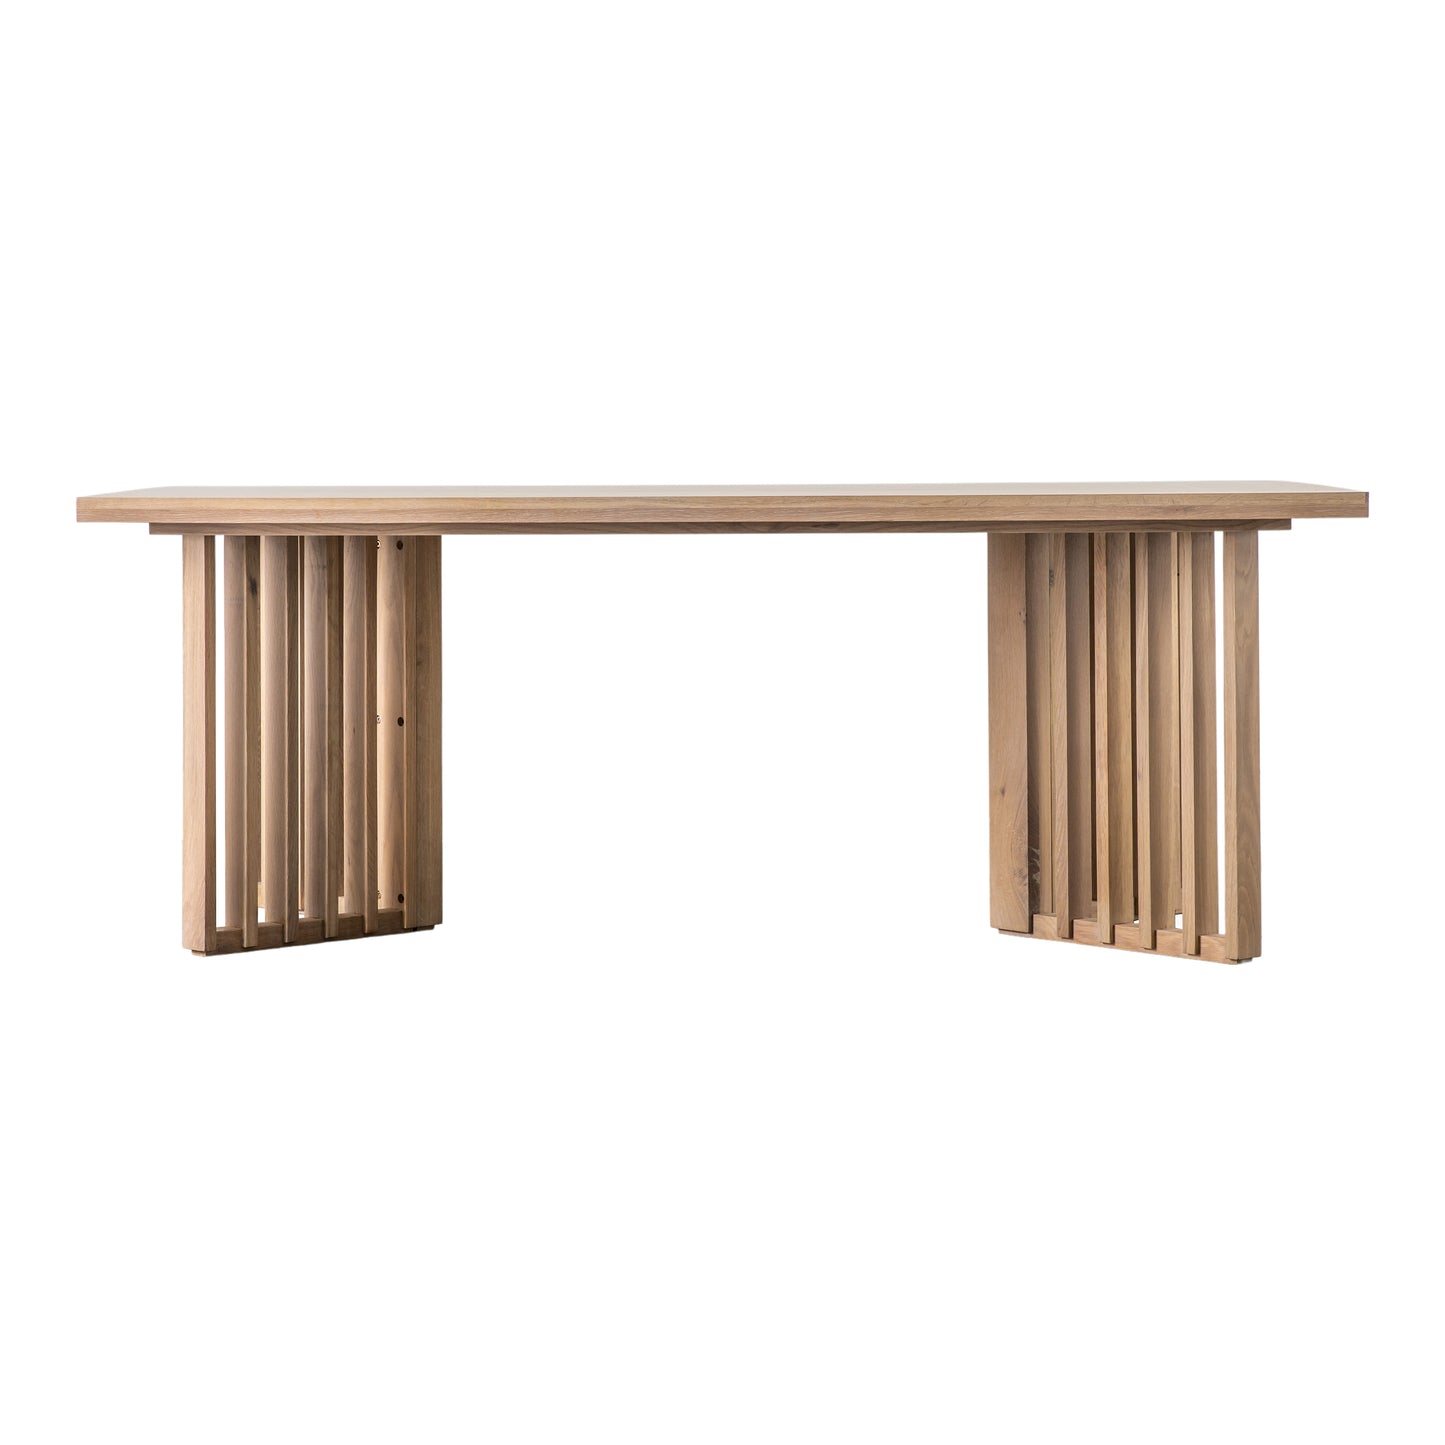 A Kikiathome.co.uk dining table for interior decor with a slatted top.